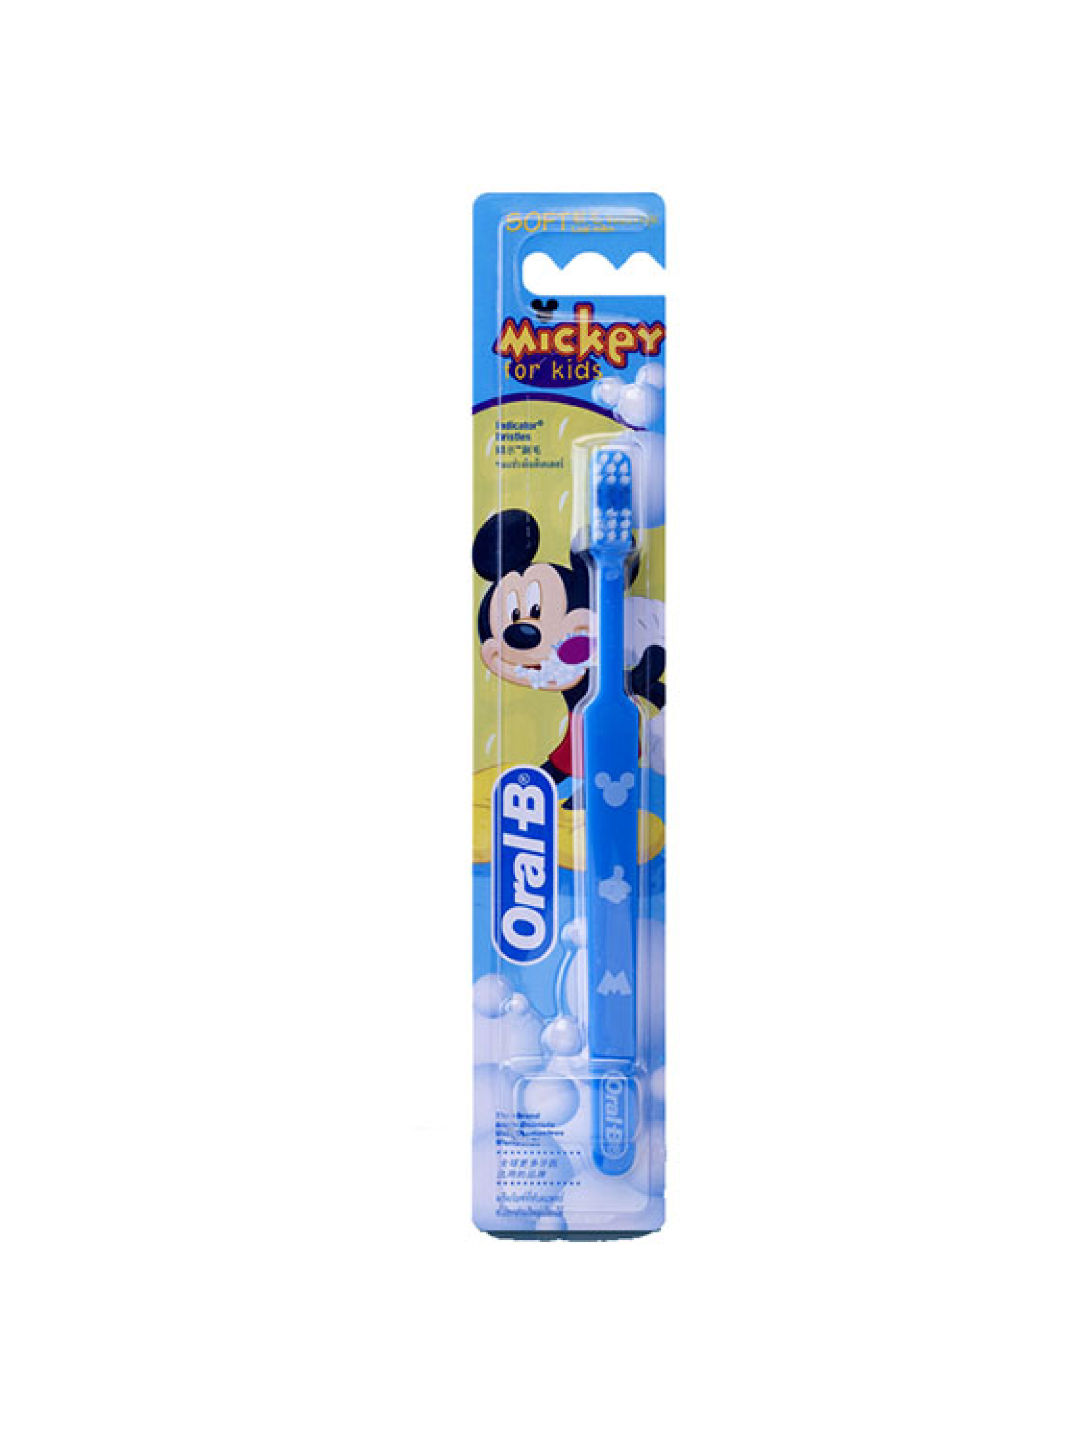 Oral-B Mickey Toothbrush (1-3 years old)